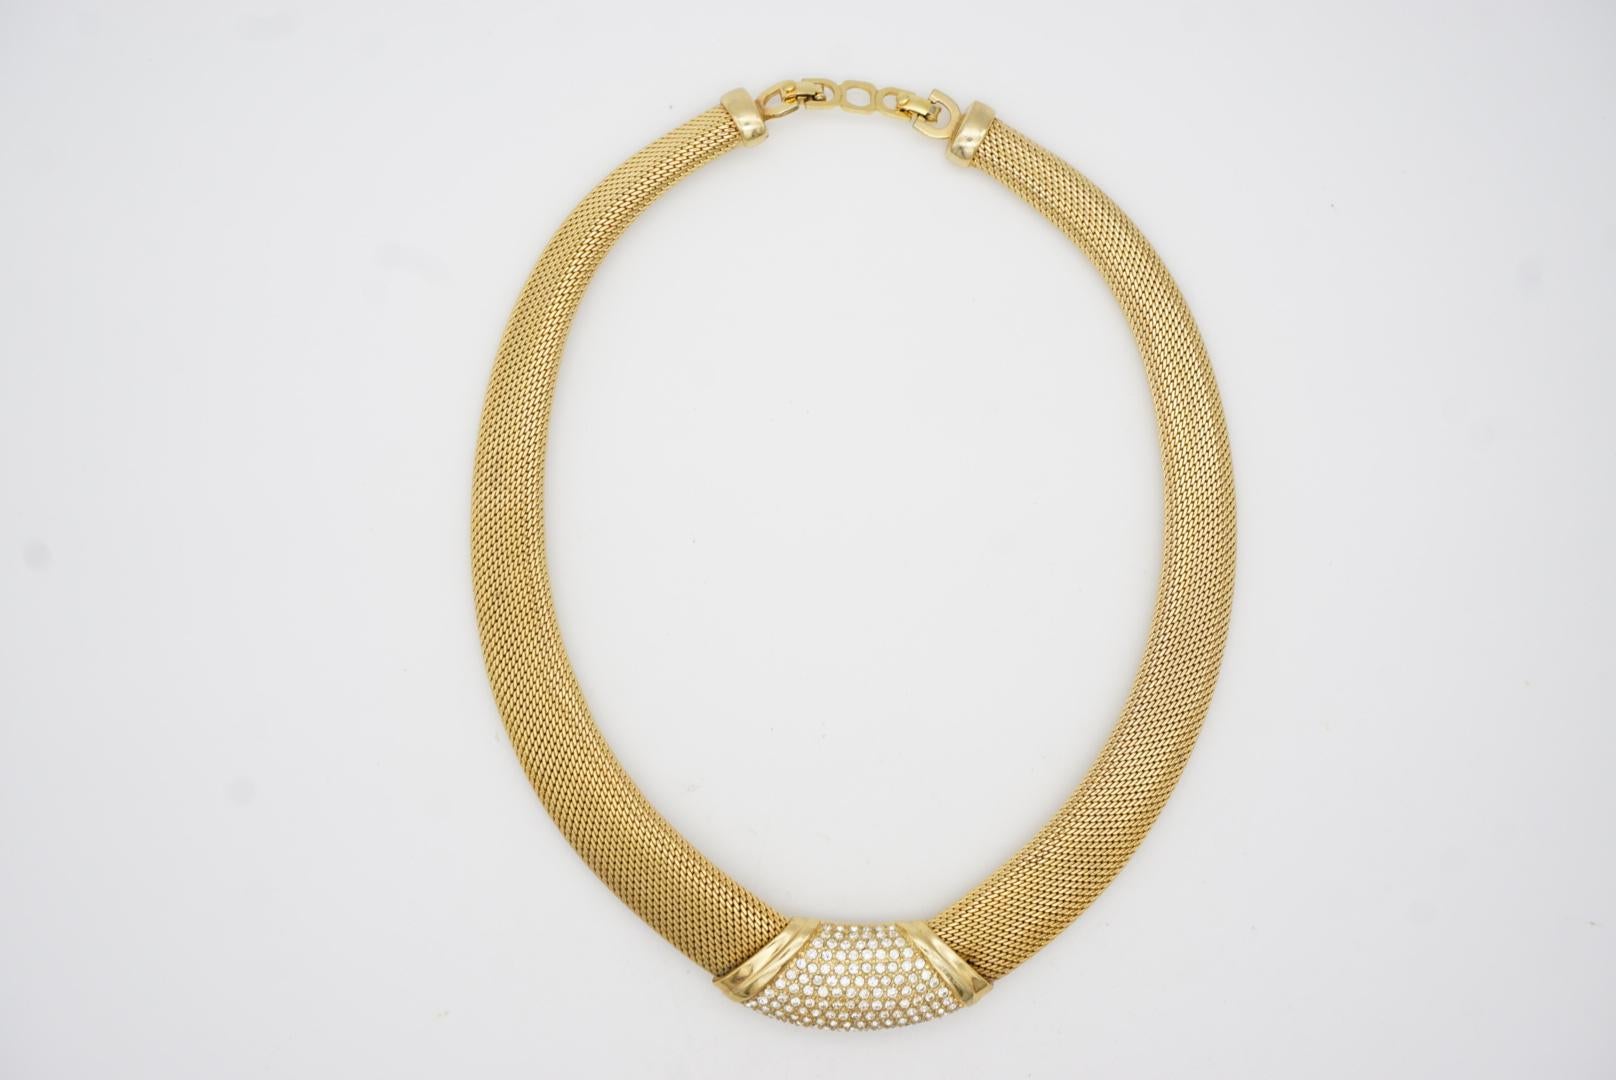 Christian Dior Vintage 1980s Crystals Pendant Chunky Snake Mesh Choker Necklace For Sale 3